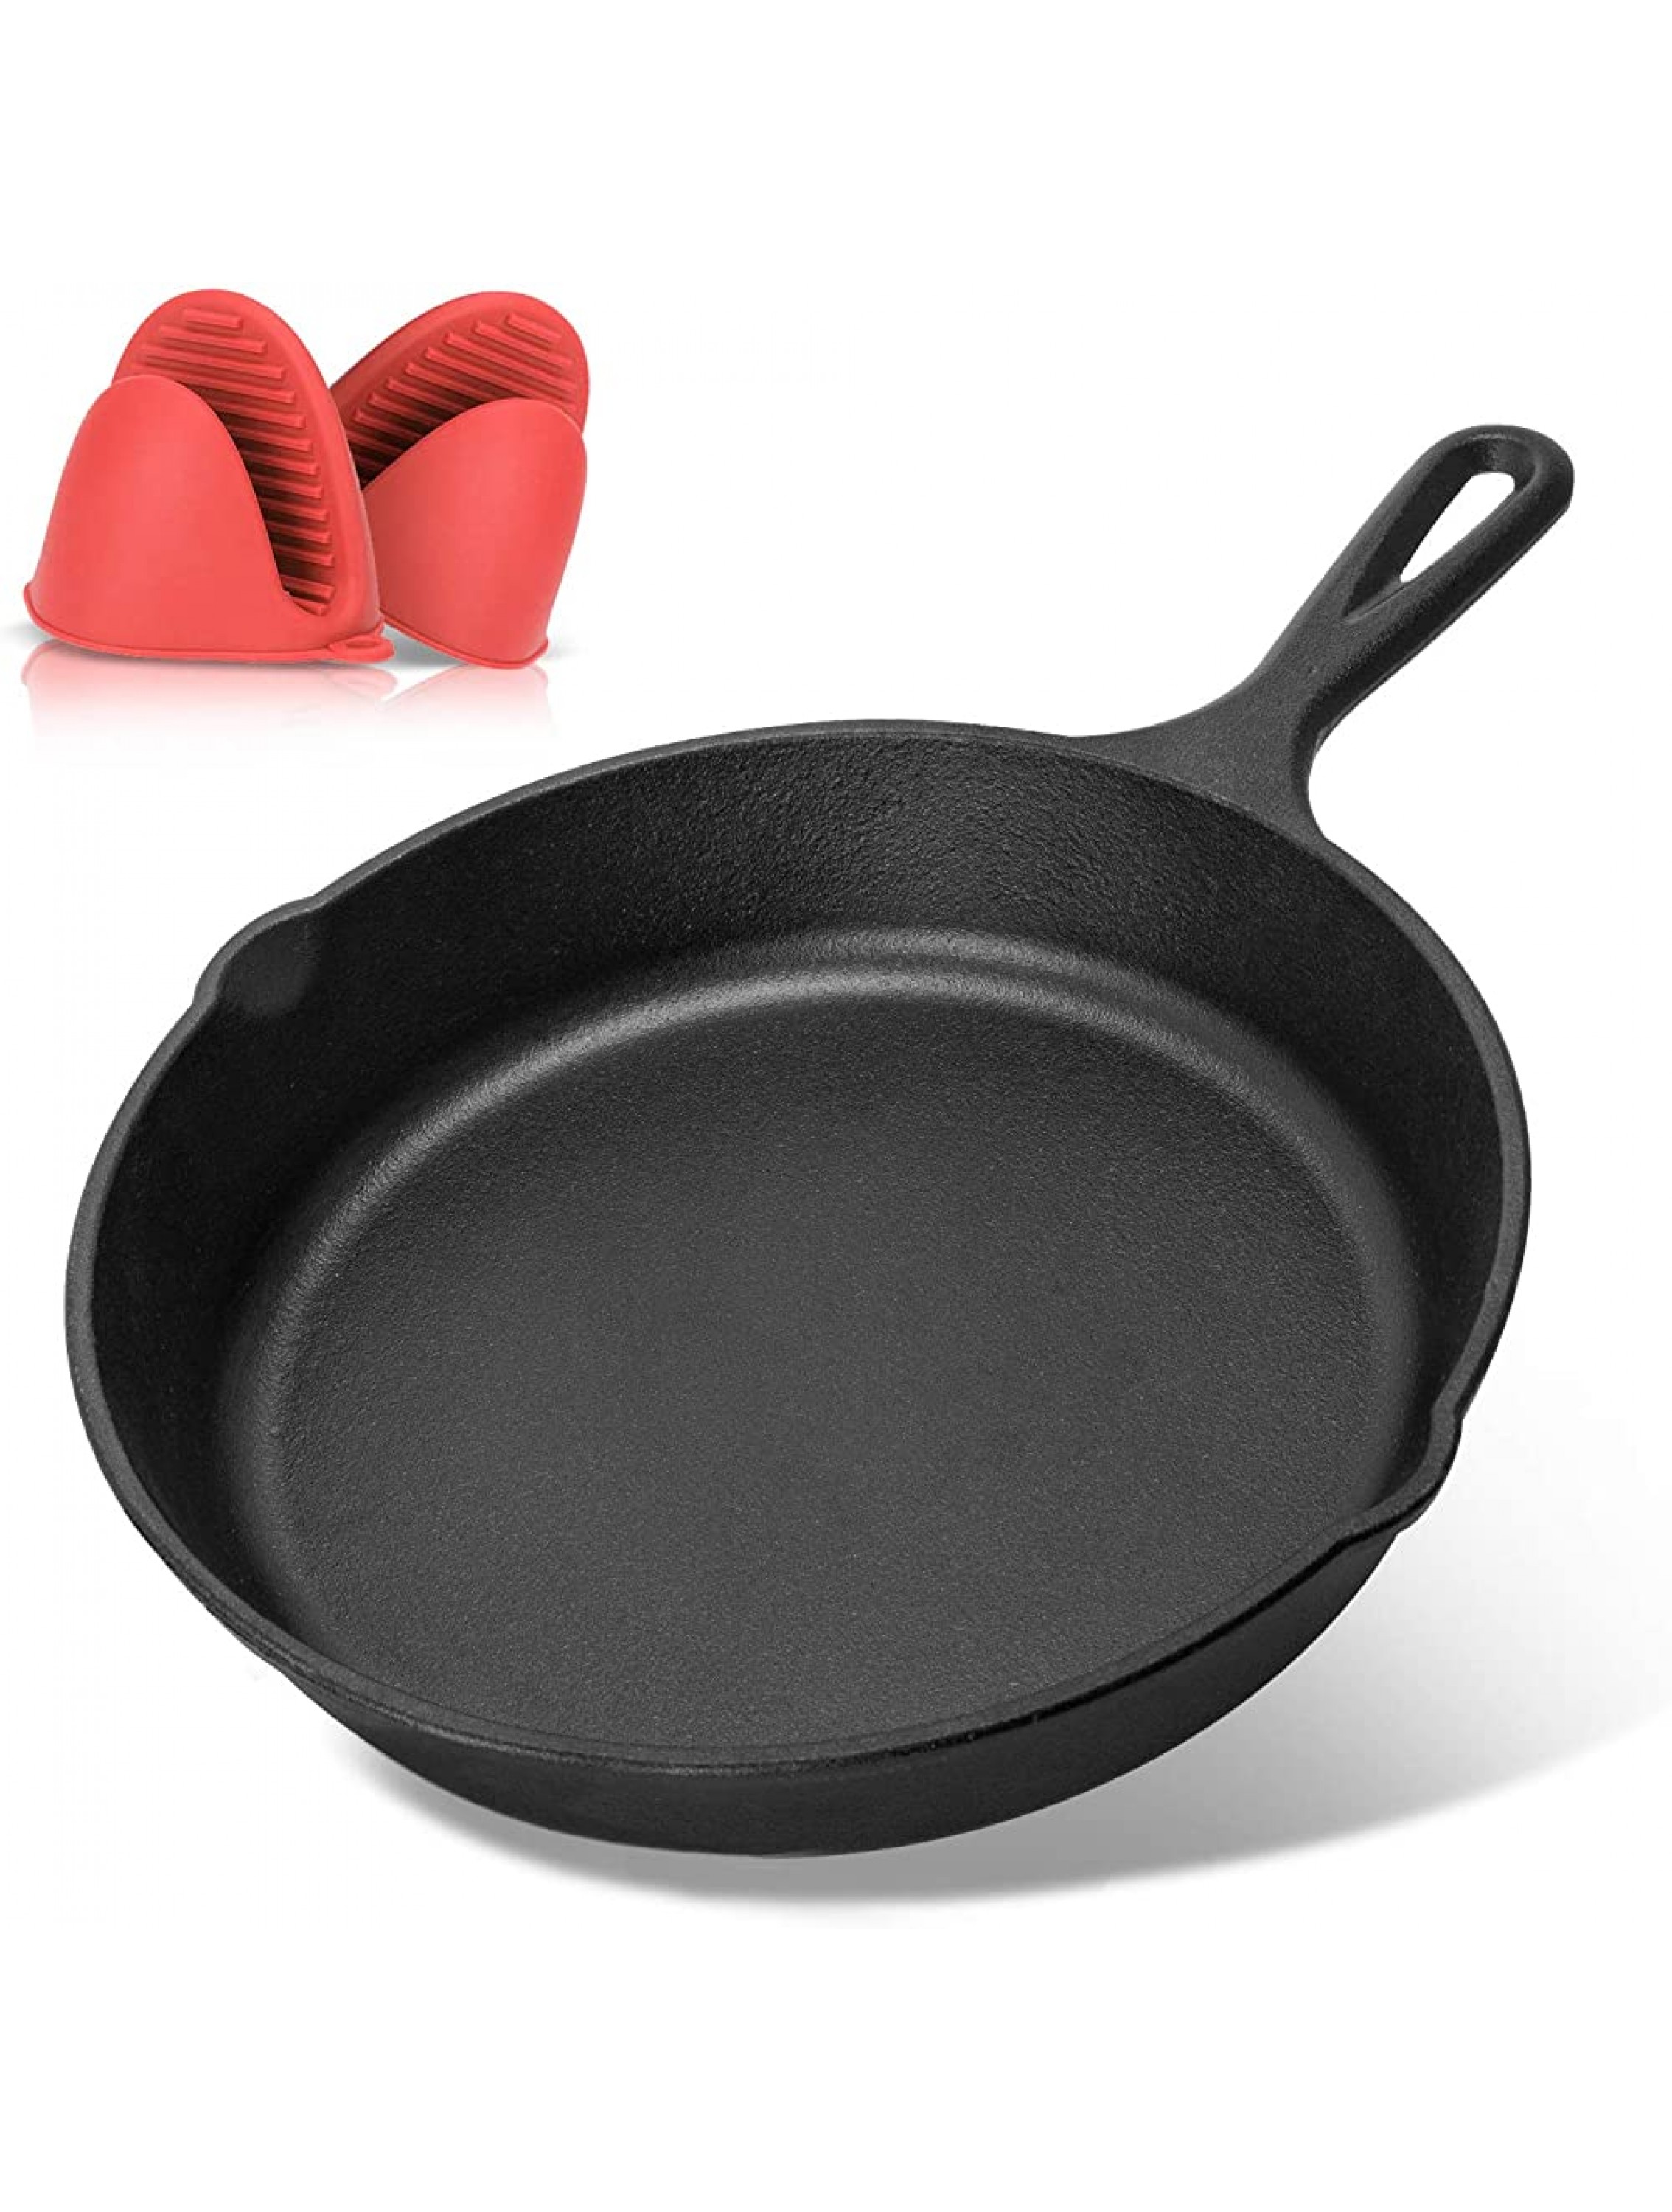 YACOOK Professional Chef Cast Iron Skillets 6 inch Pre-Seasoned Cast Iron Pan Non- Stick for Home Camping Indoor and Outdoor Cooking Searing and Baking on Stove top Frying Pan - BV33FZK9L